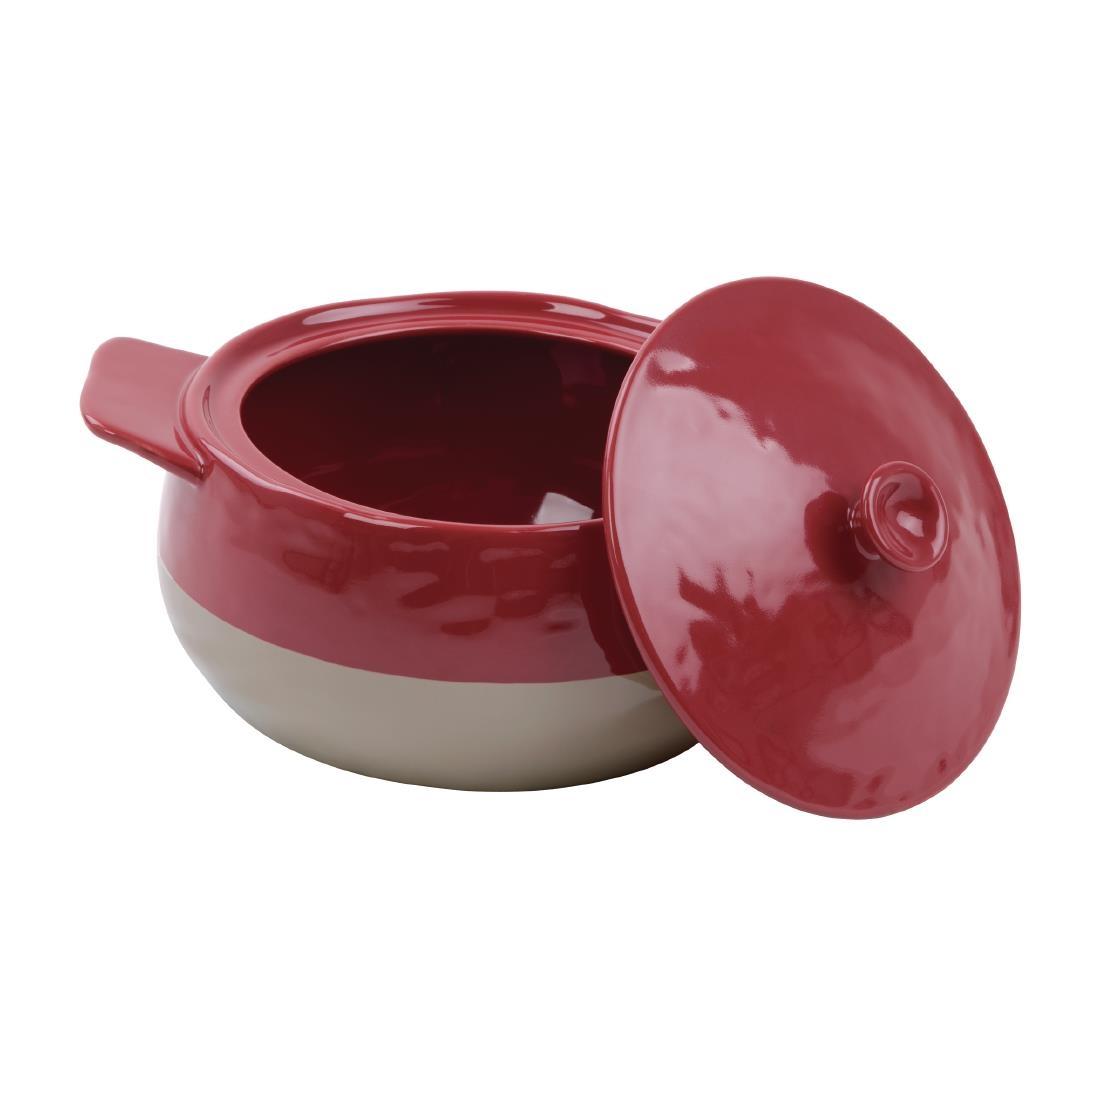 Olympia Red And Taupe Round Casserole Dish 1.8Ltr - DB528  - 2